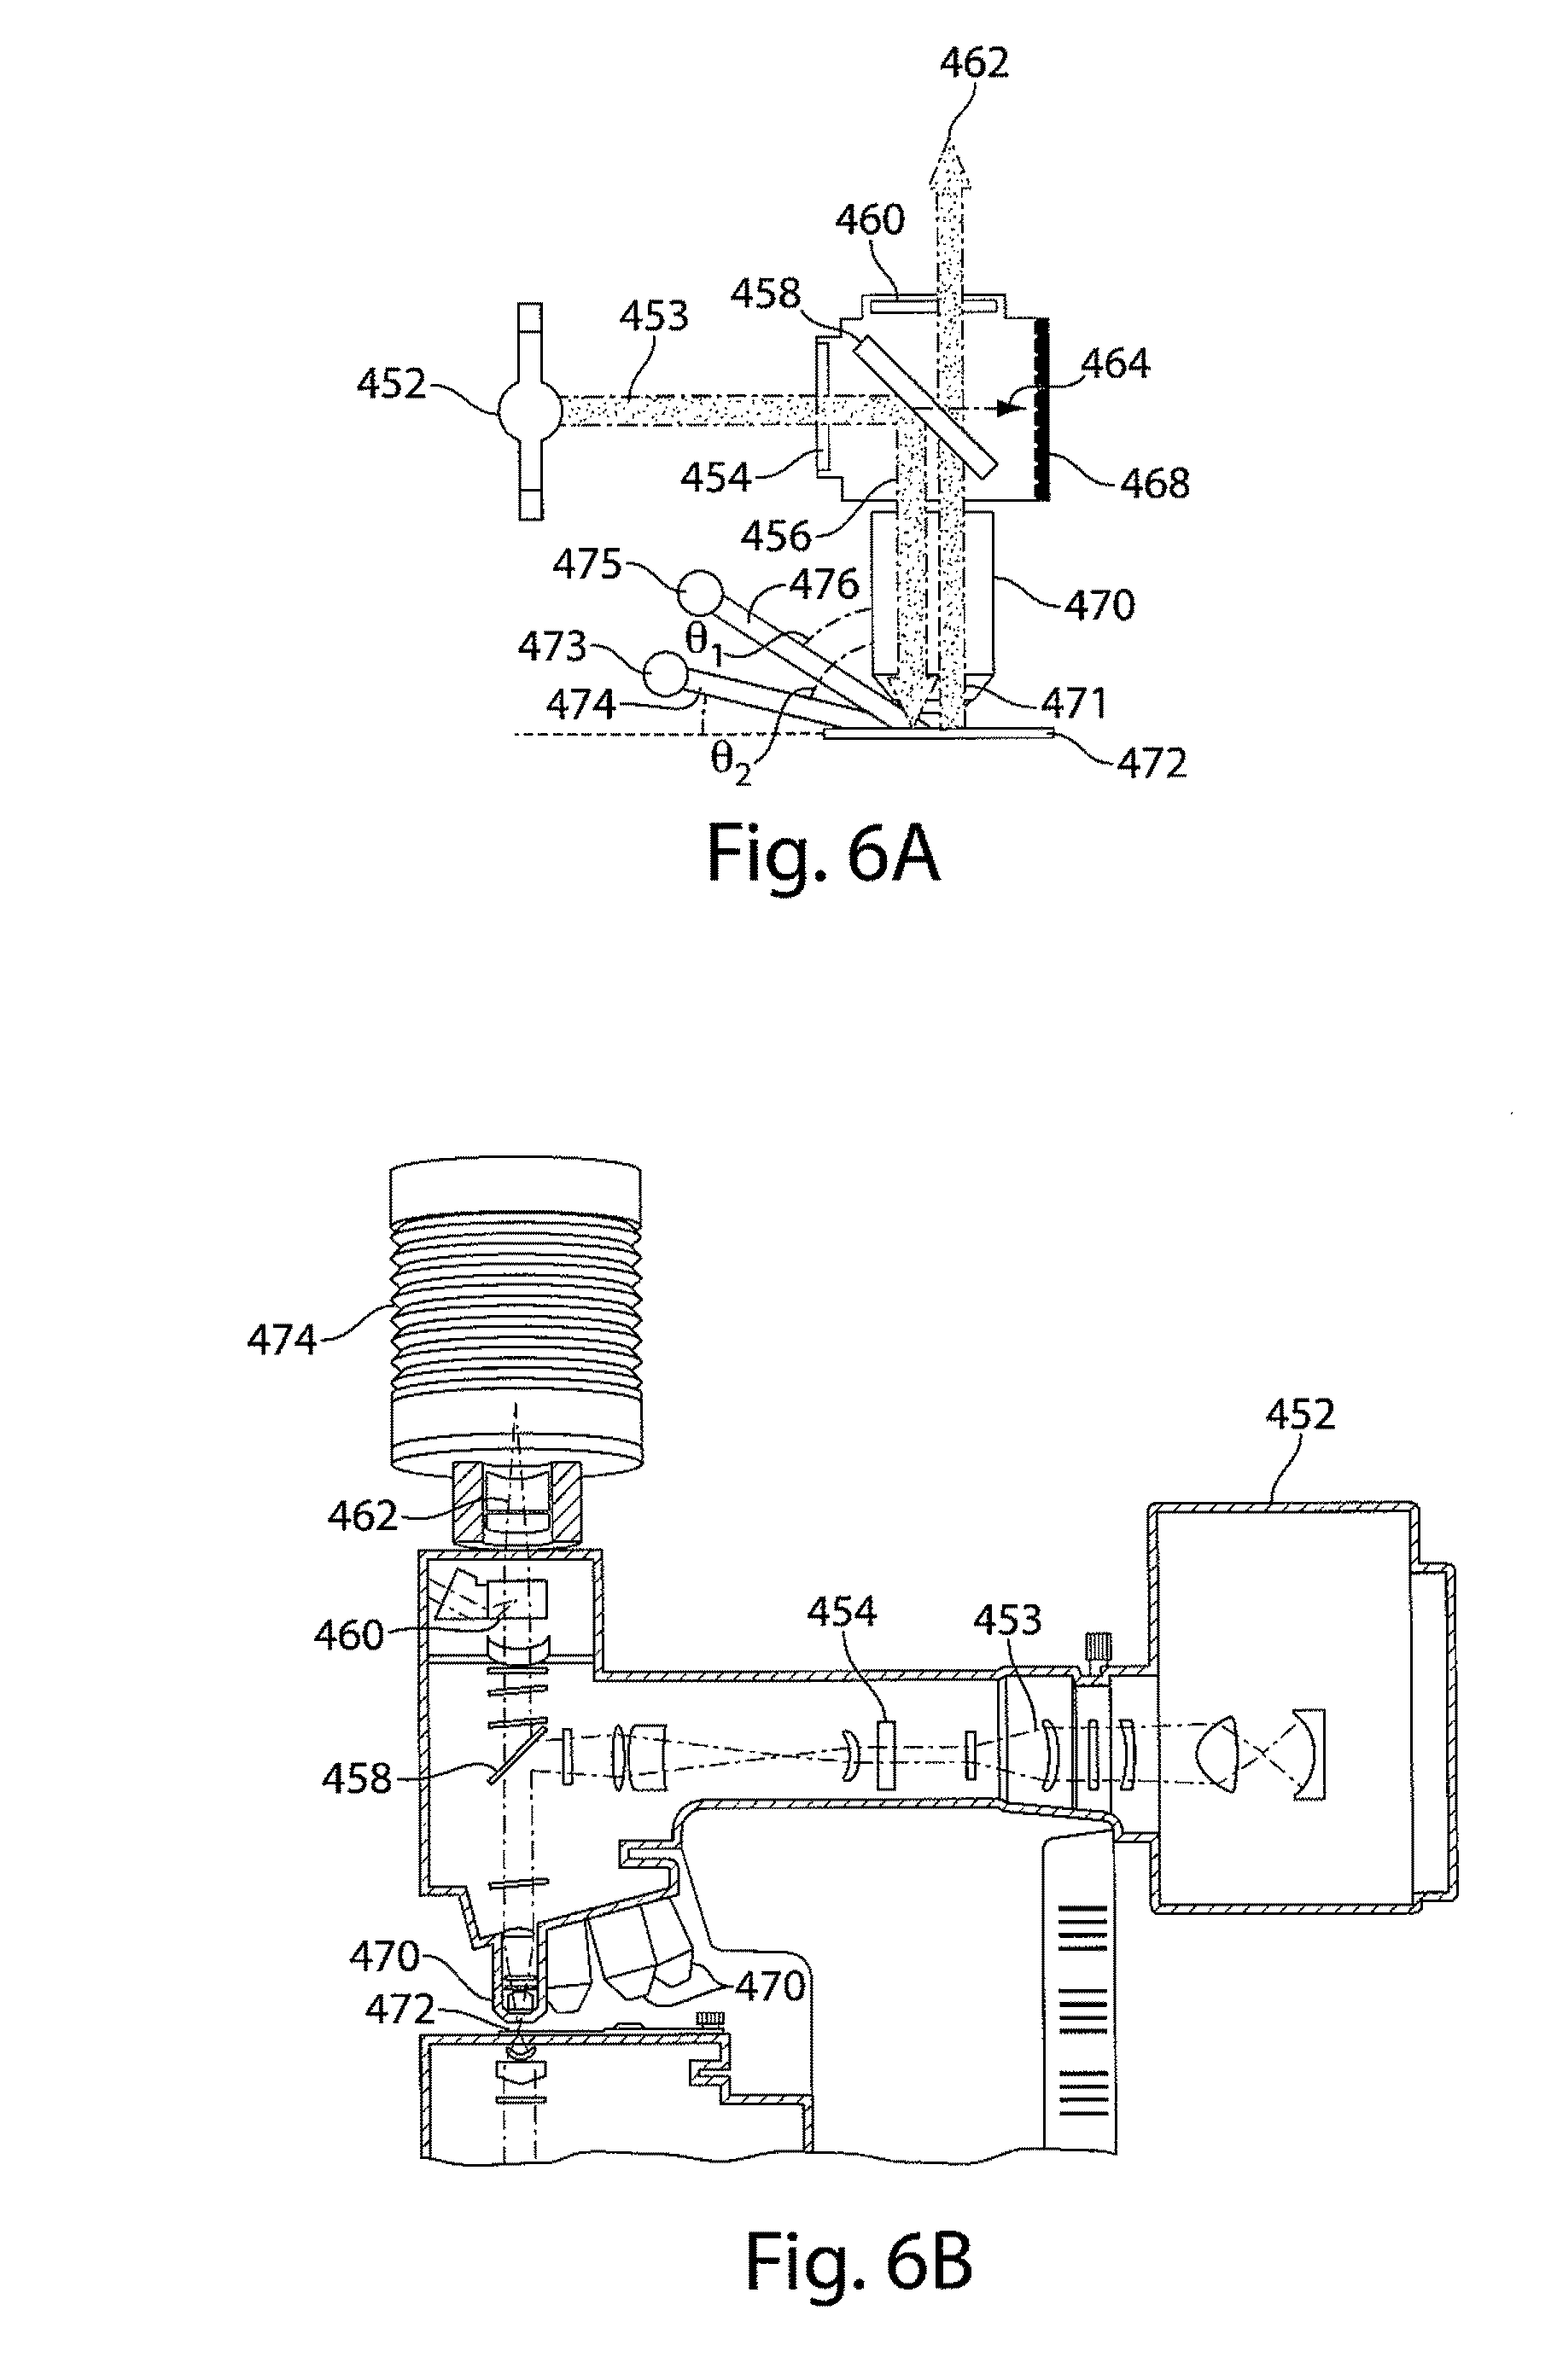 Methods and systems for extending dynamic range in assays for the detection of molecules or particles